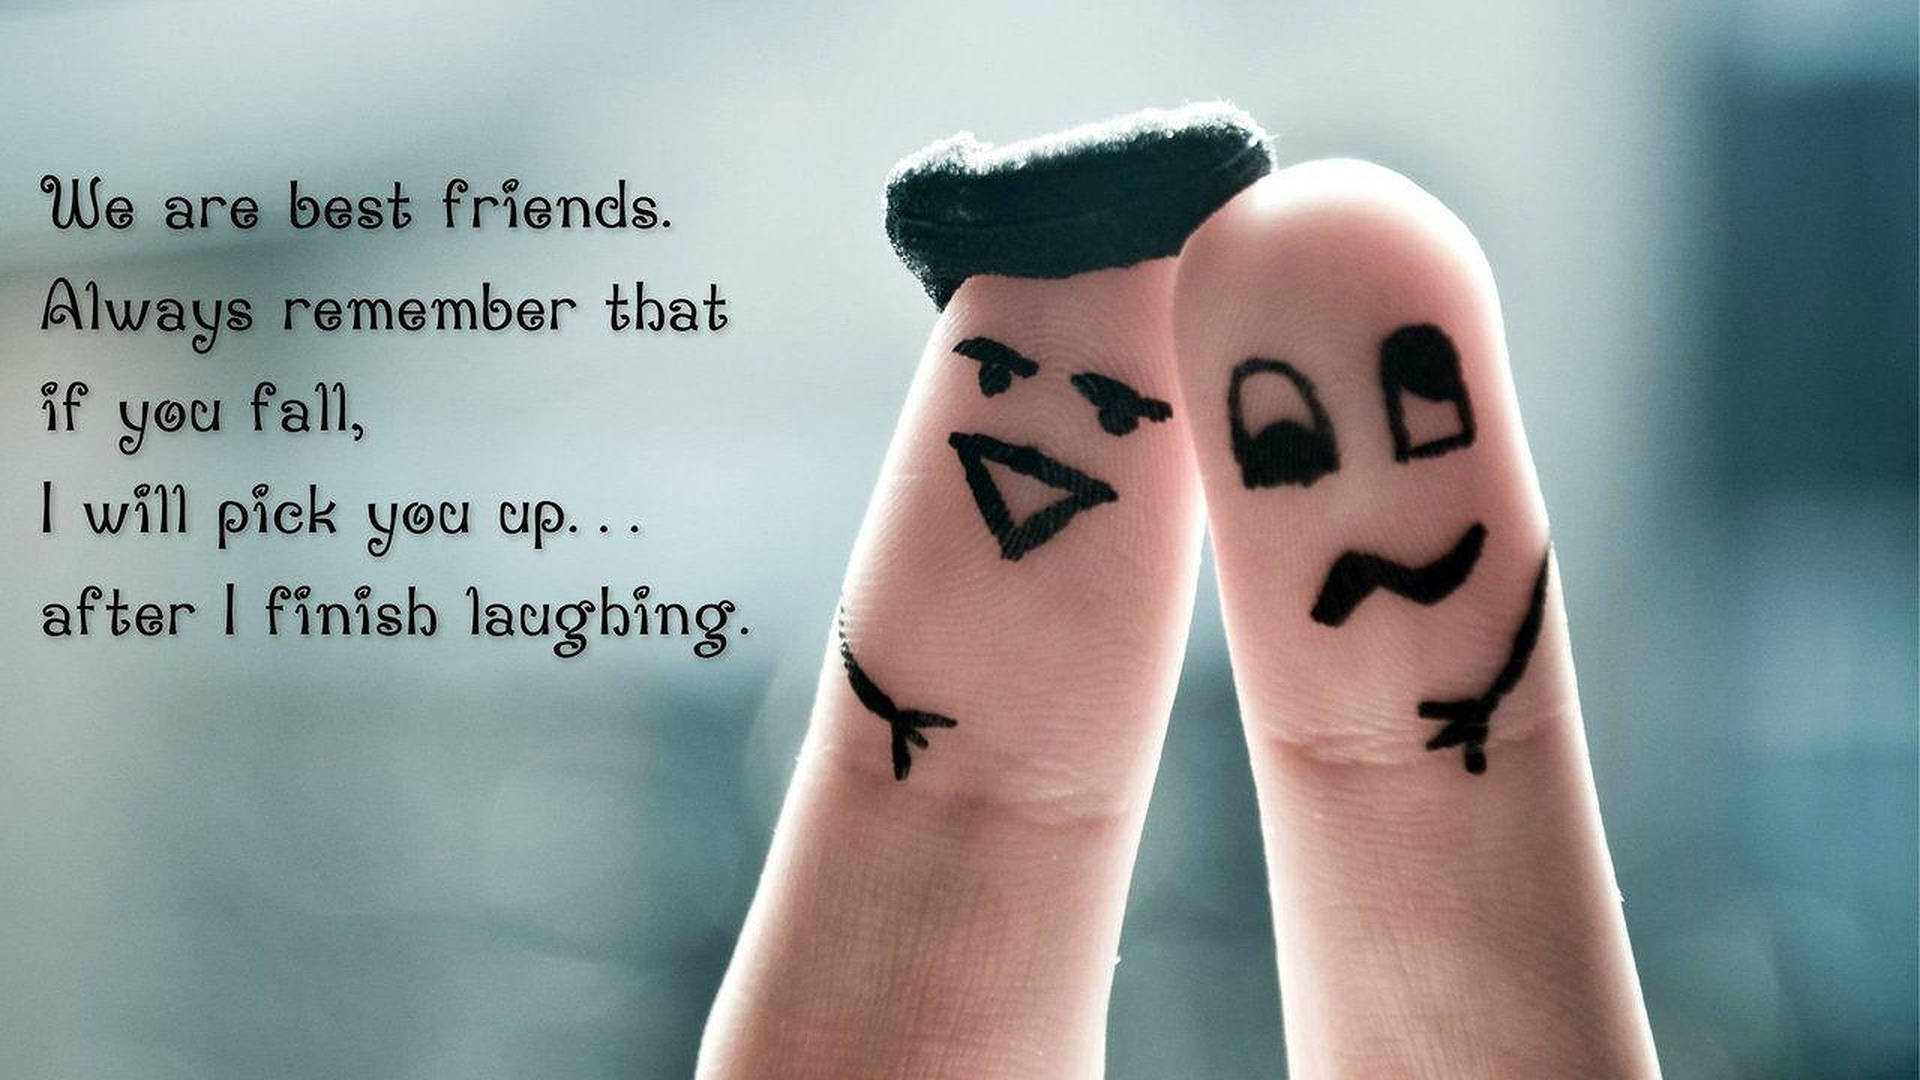 Friendship Quotes With Fingers Background